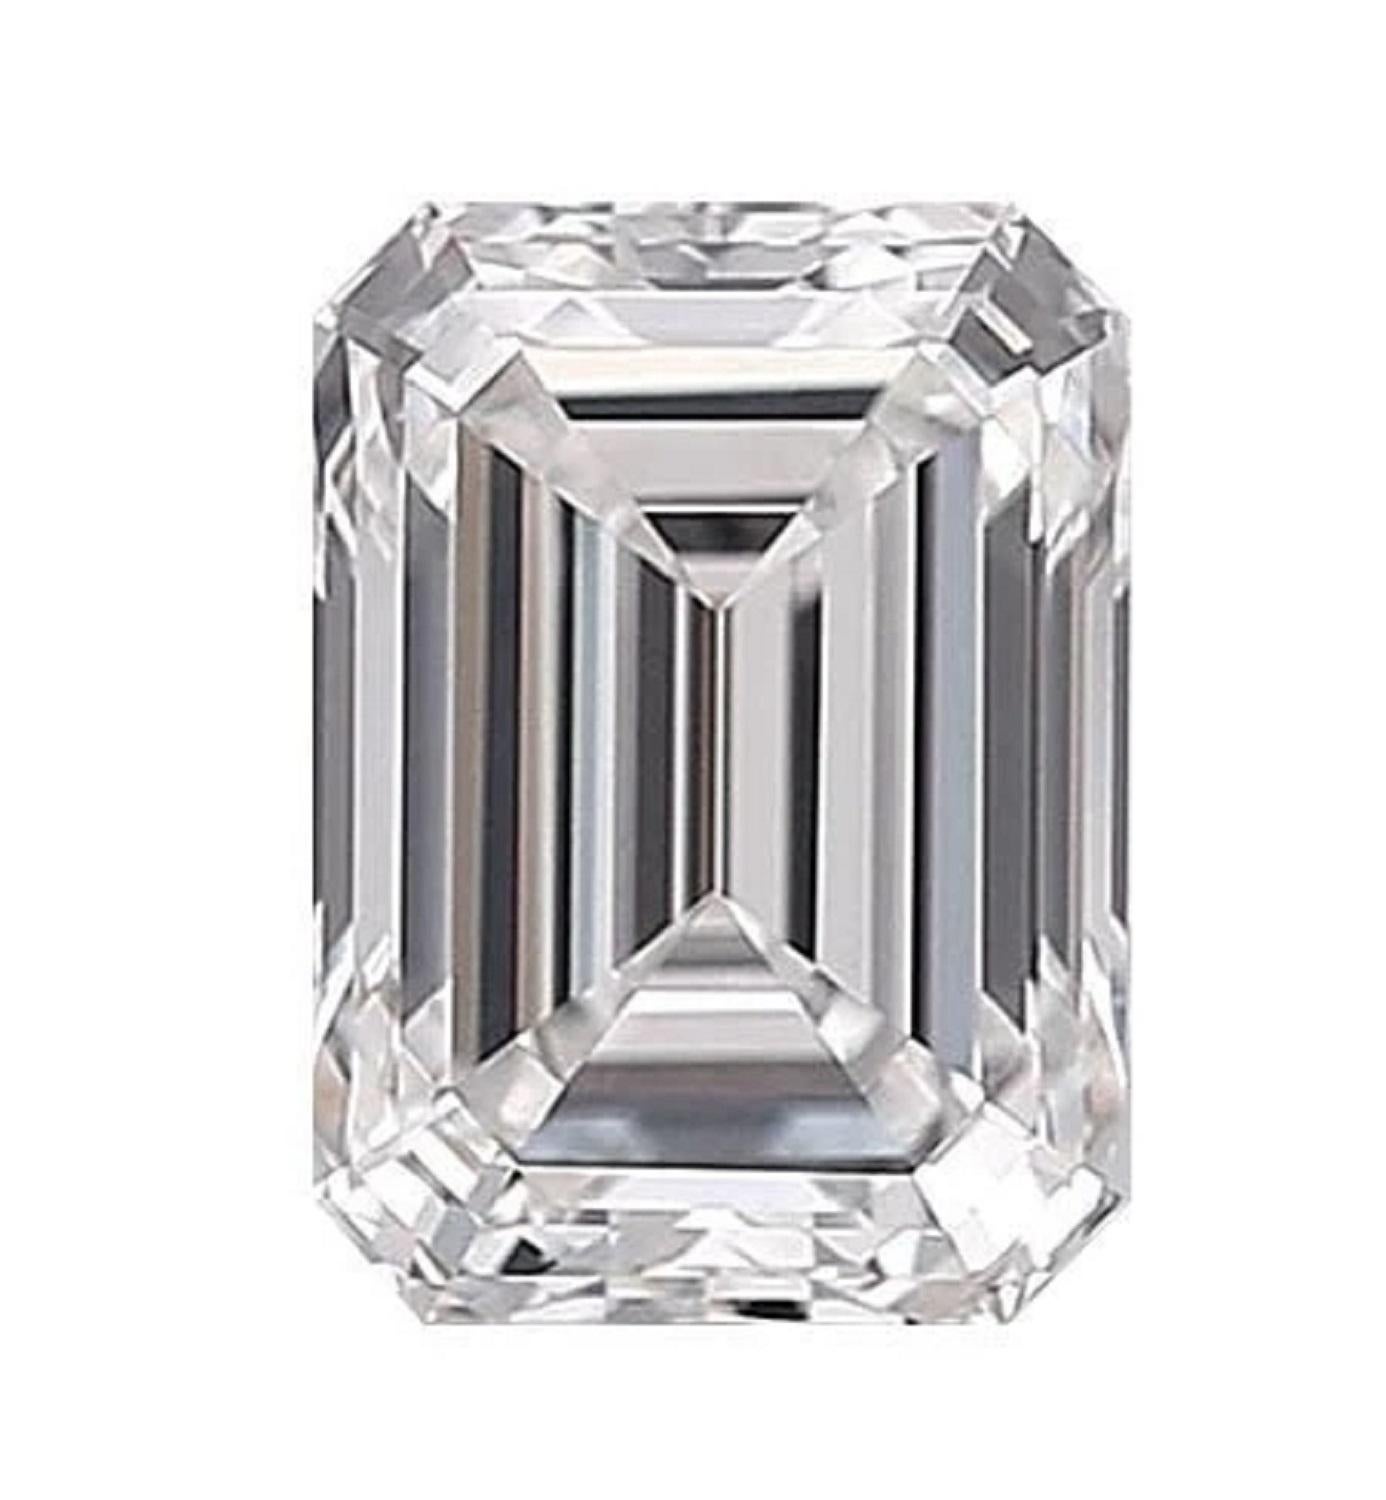 A Spectacular Emerald Cut Weighing 4 Carat with a double pave of diamonds 
a very long diamond with excellent proportions and 100% eye clean
set in solid platinum with pave diamonds



